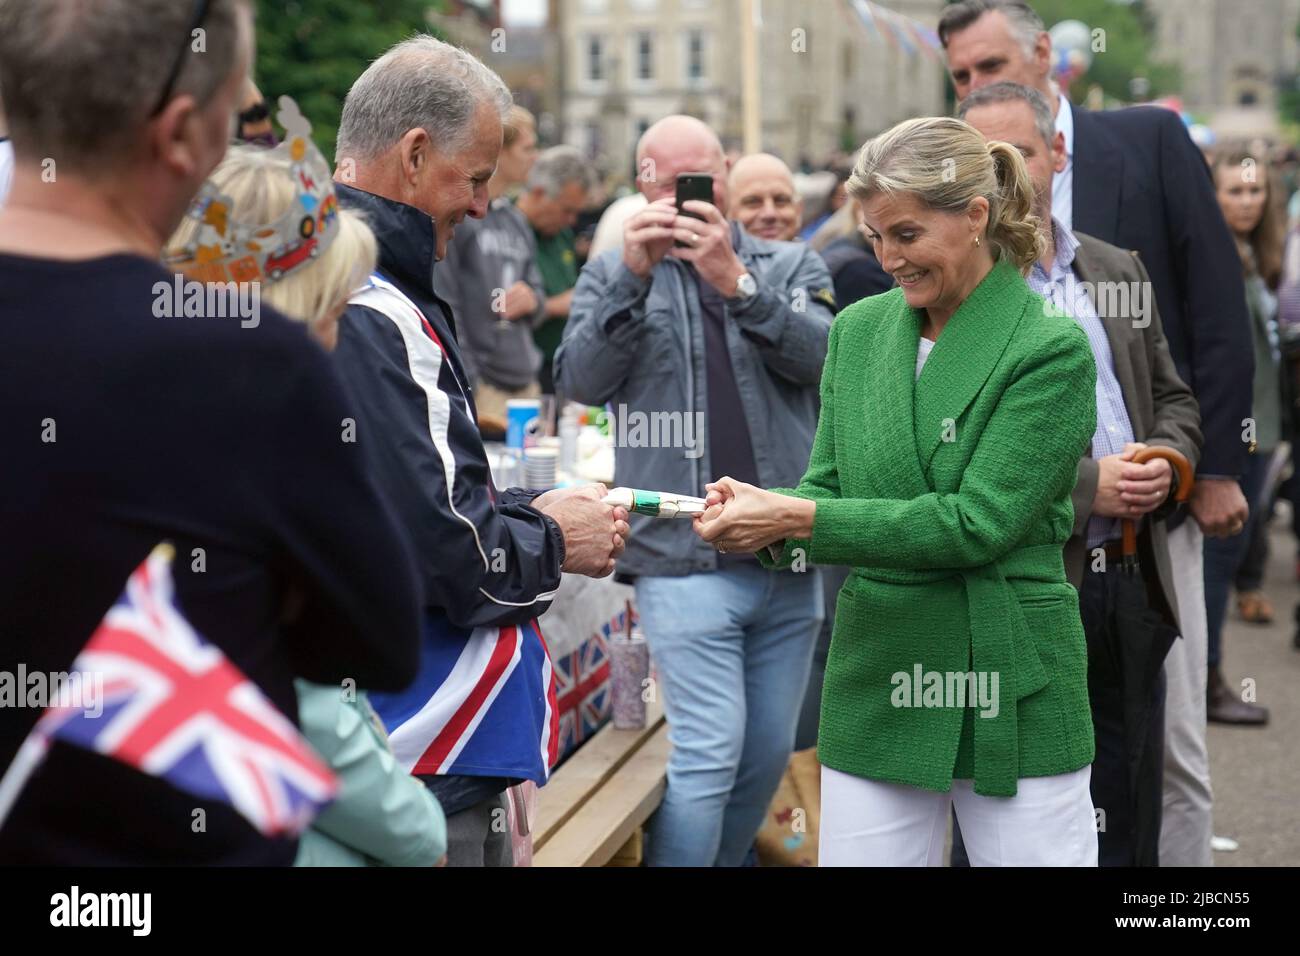 The Countess of Wessex is seen during the Big Jubilee Lunch with members of the local community seated at 'The Long Table' on The Long Walk, Windsor Castle, on day four of the Platinum Jubilee celebrations. Picture date: Sunday June 5, 2022. Stock Photo